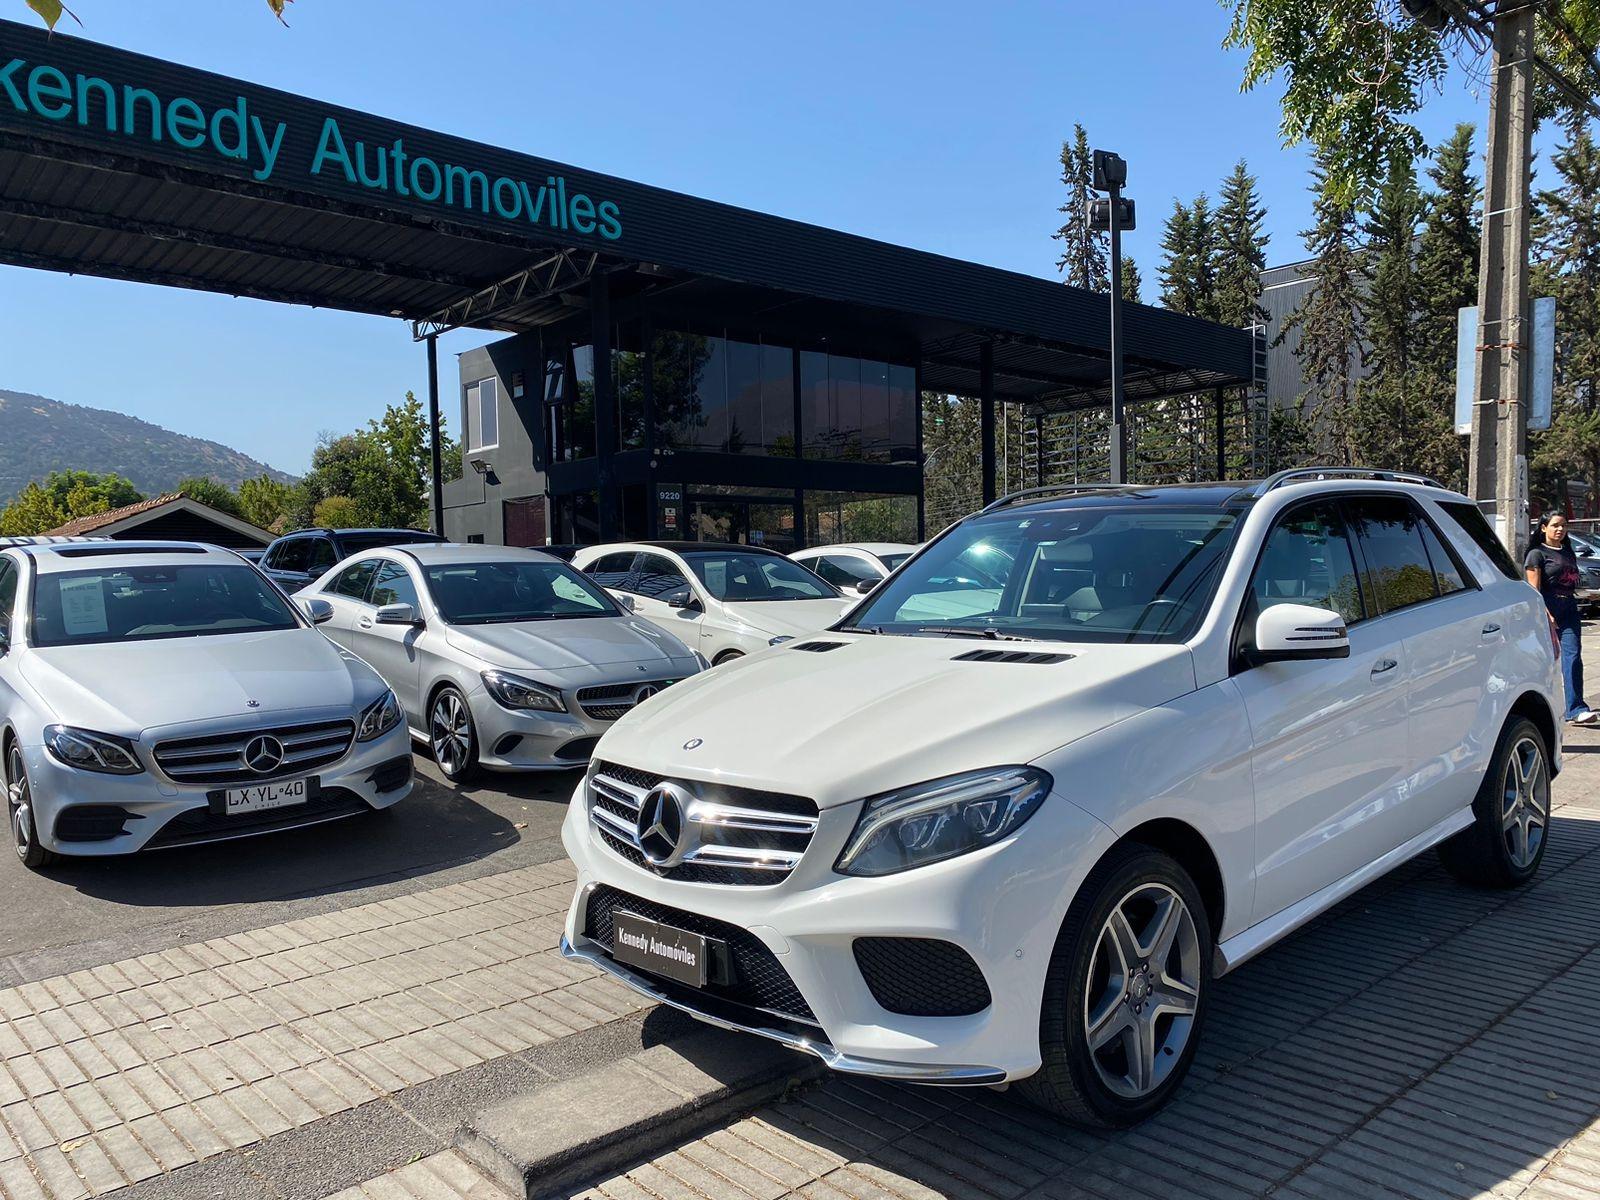 MERCEDES-BENZ GLE 400  2016 Impecable  - KENNEDY AUTOMOVILES